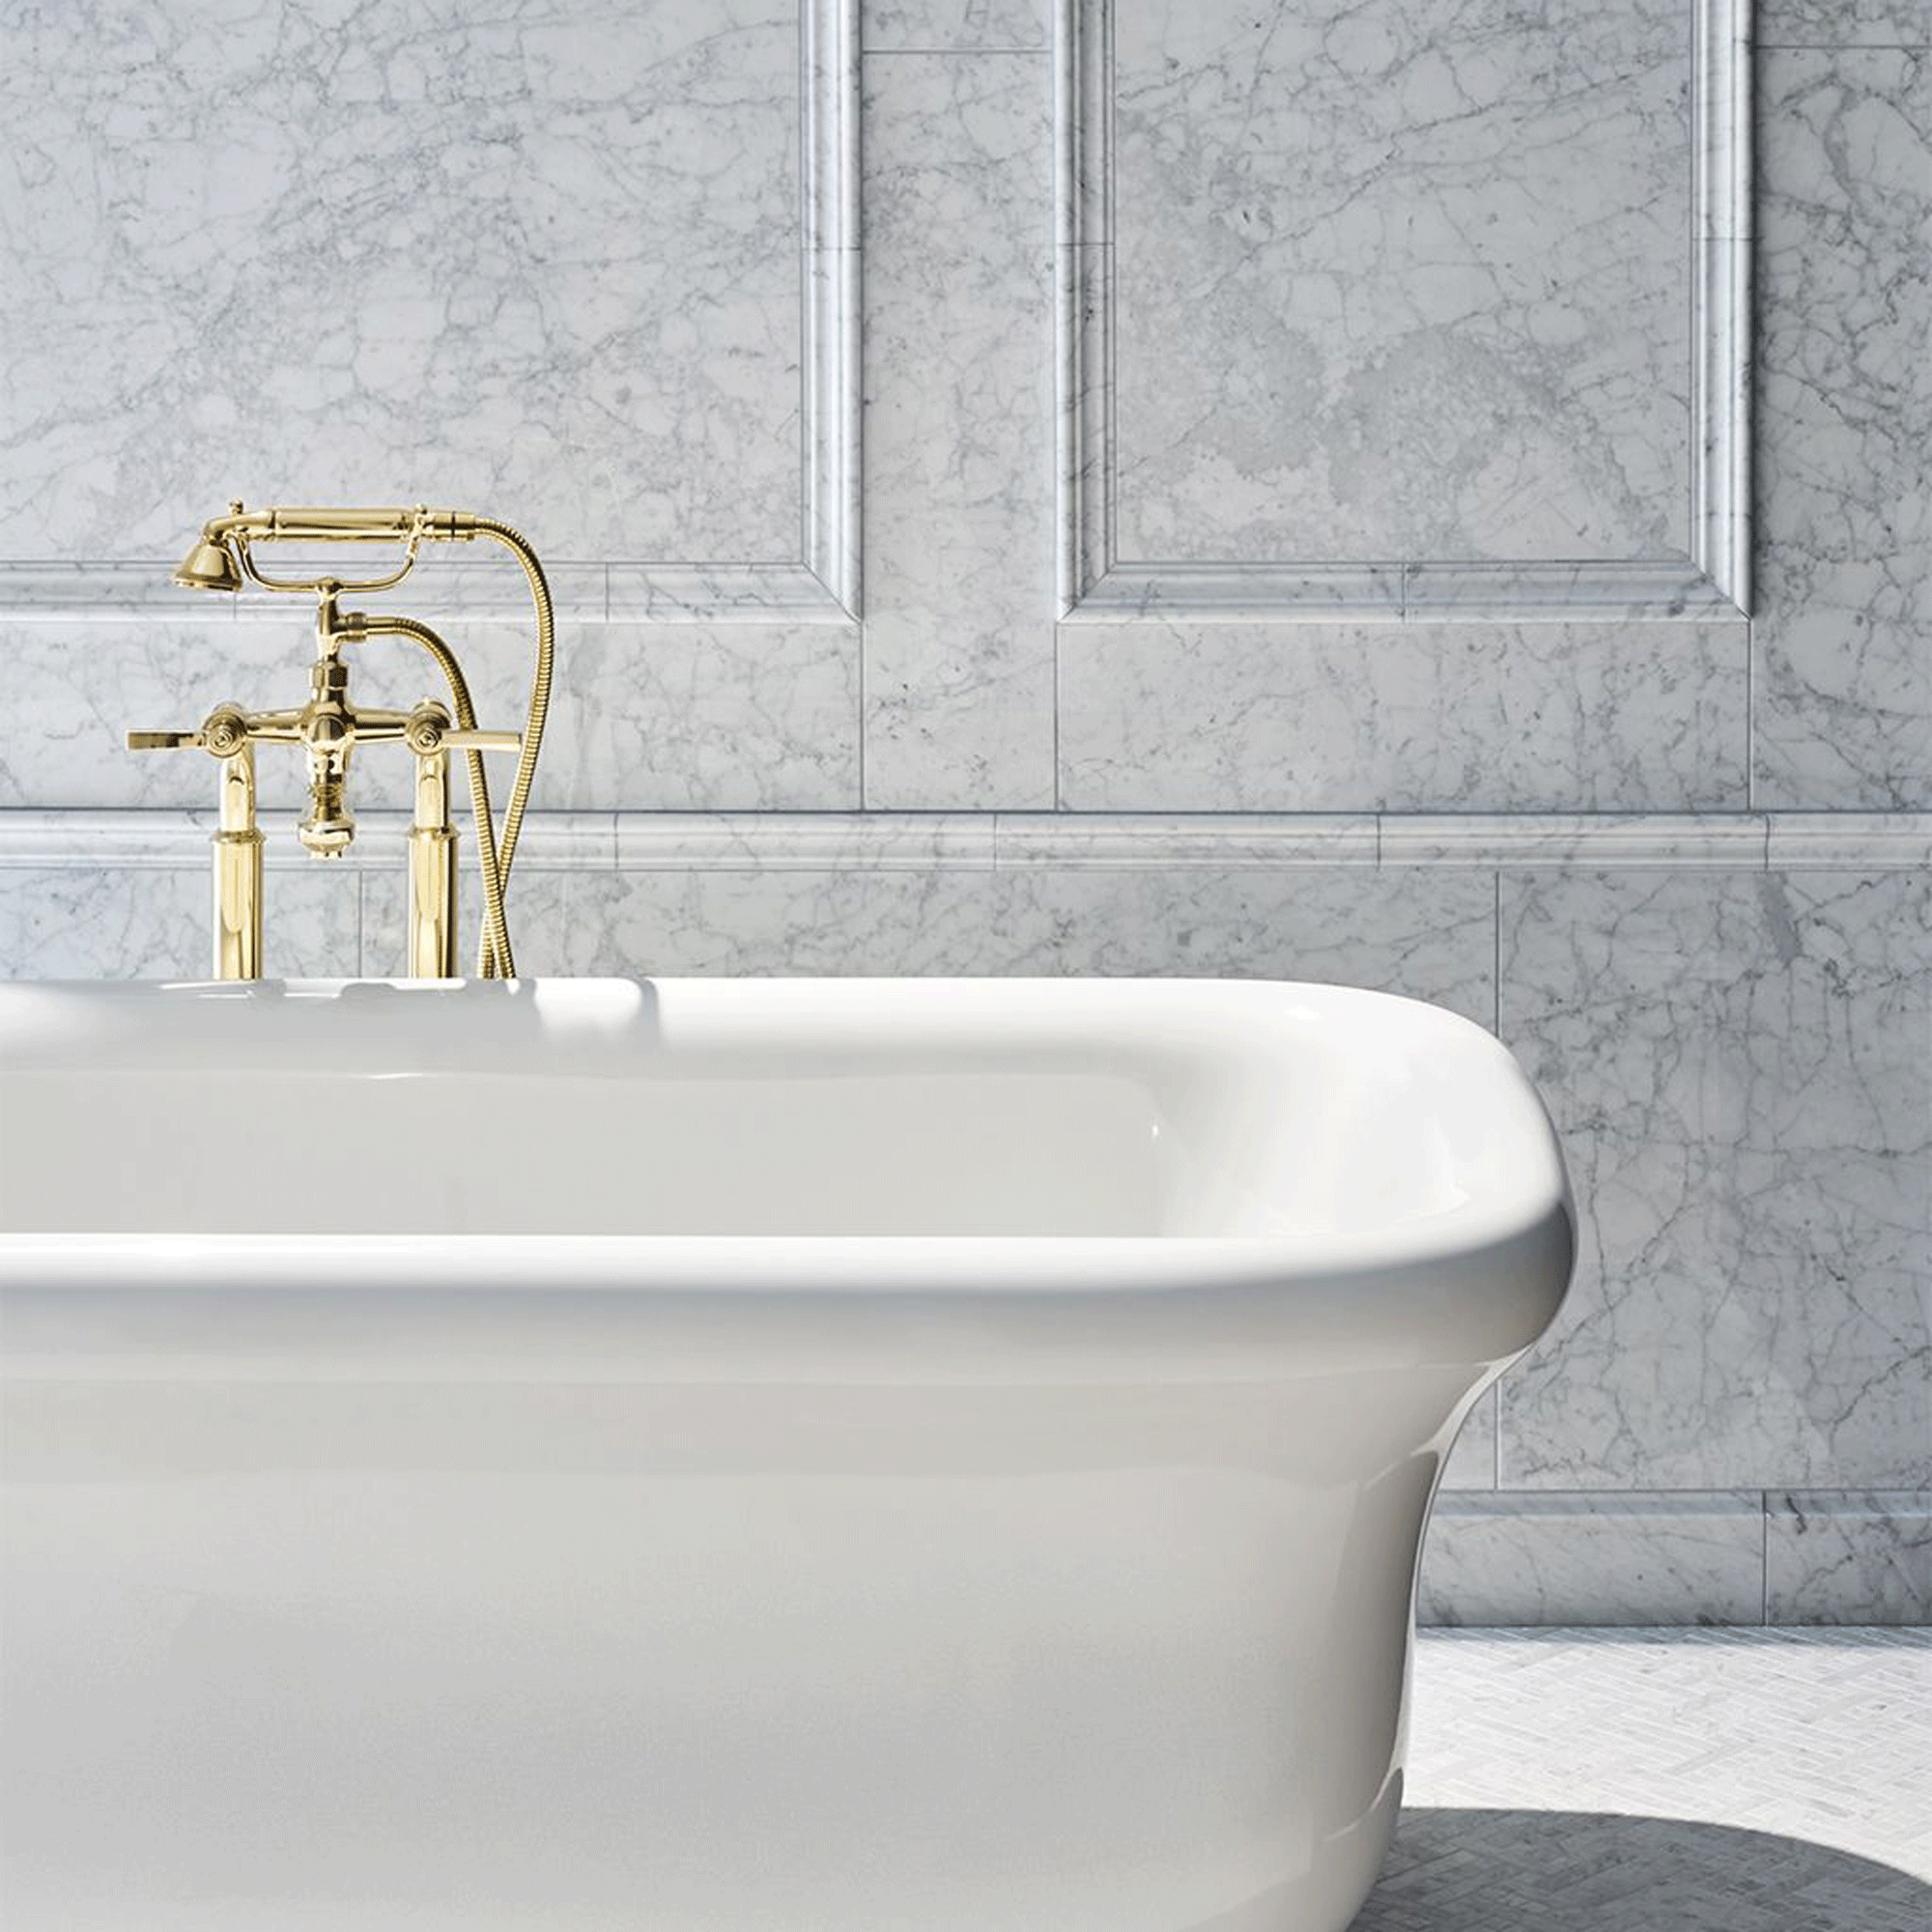 curved freestanding bath with gold mixer tap